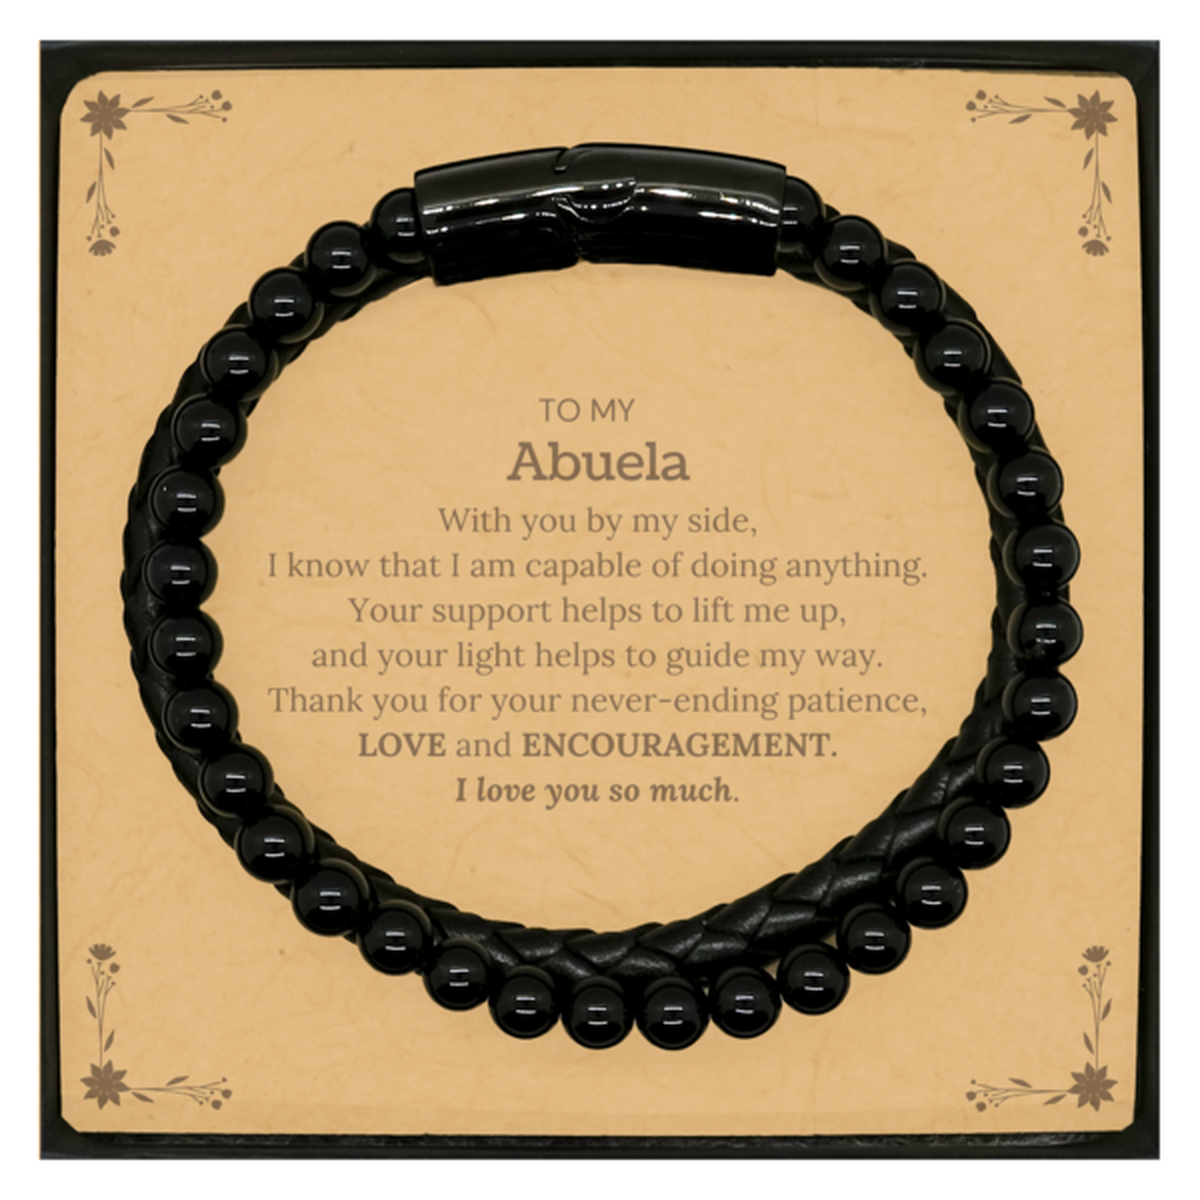 Appreciation Abuela Stone Leather Bracelets Gifts, To My Abuela Birthday Christmas Wedding Keepsake Gifts for Abuela With you by my side, I know that I am capable of doing anything. I love you so much